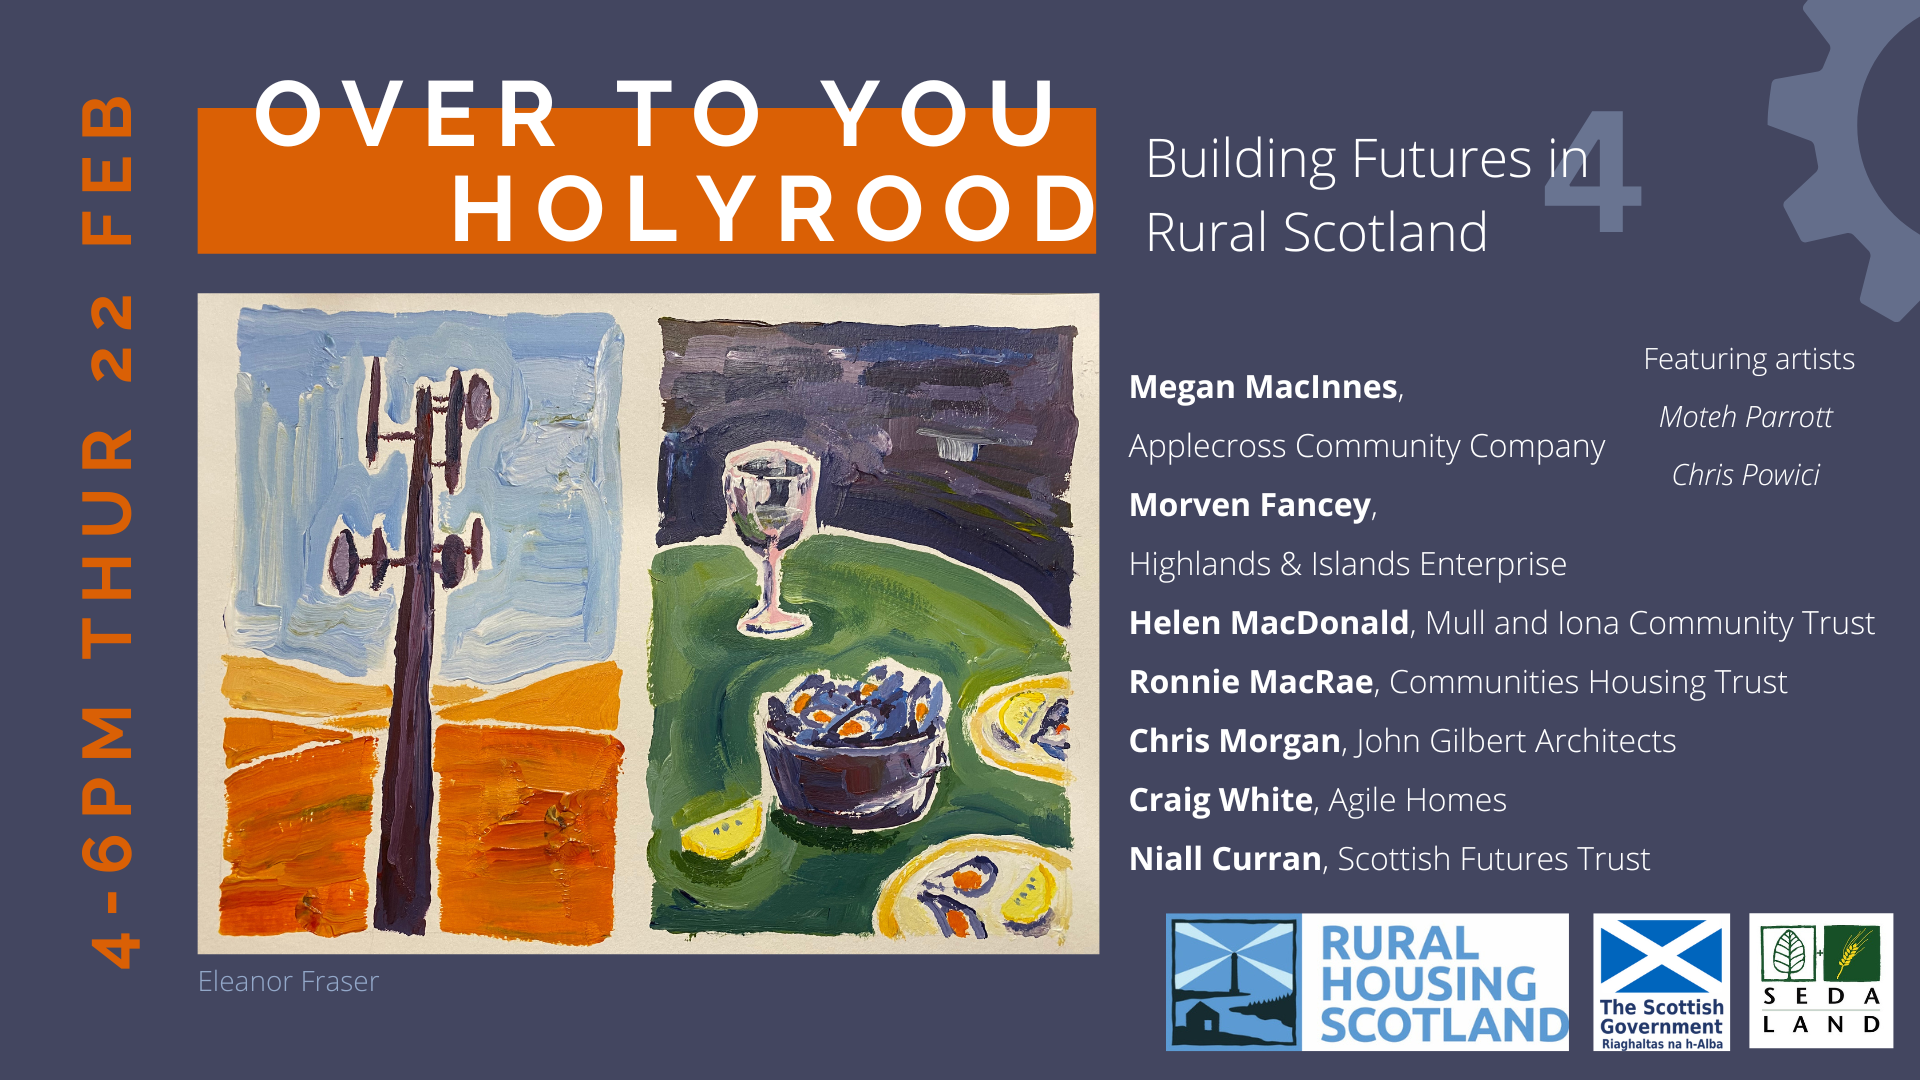 Building Futures in Rural Scotland 4 - Over To Your Holyrood